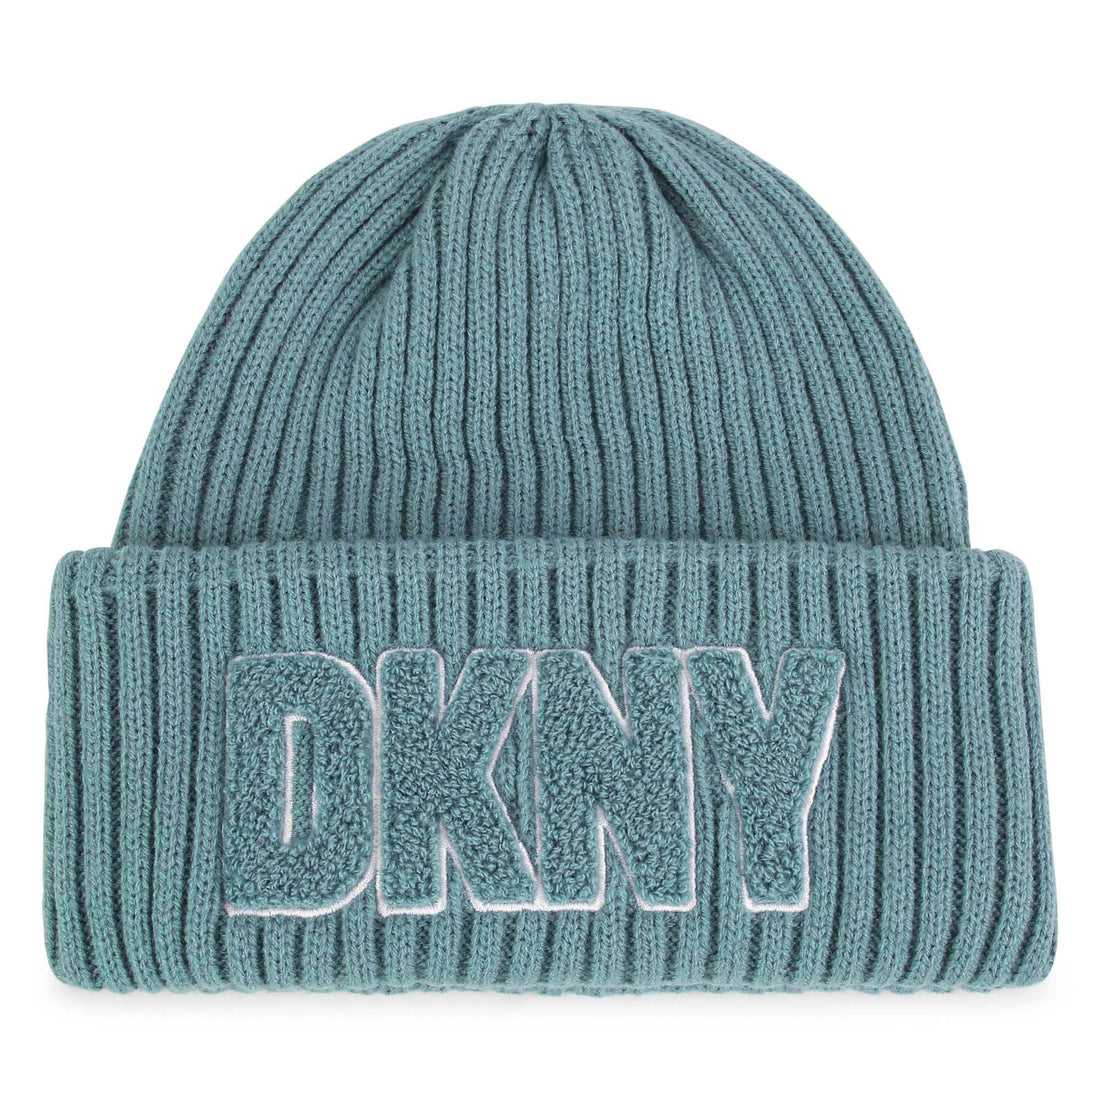 Dkny Pull On Hat Style: D51000